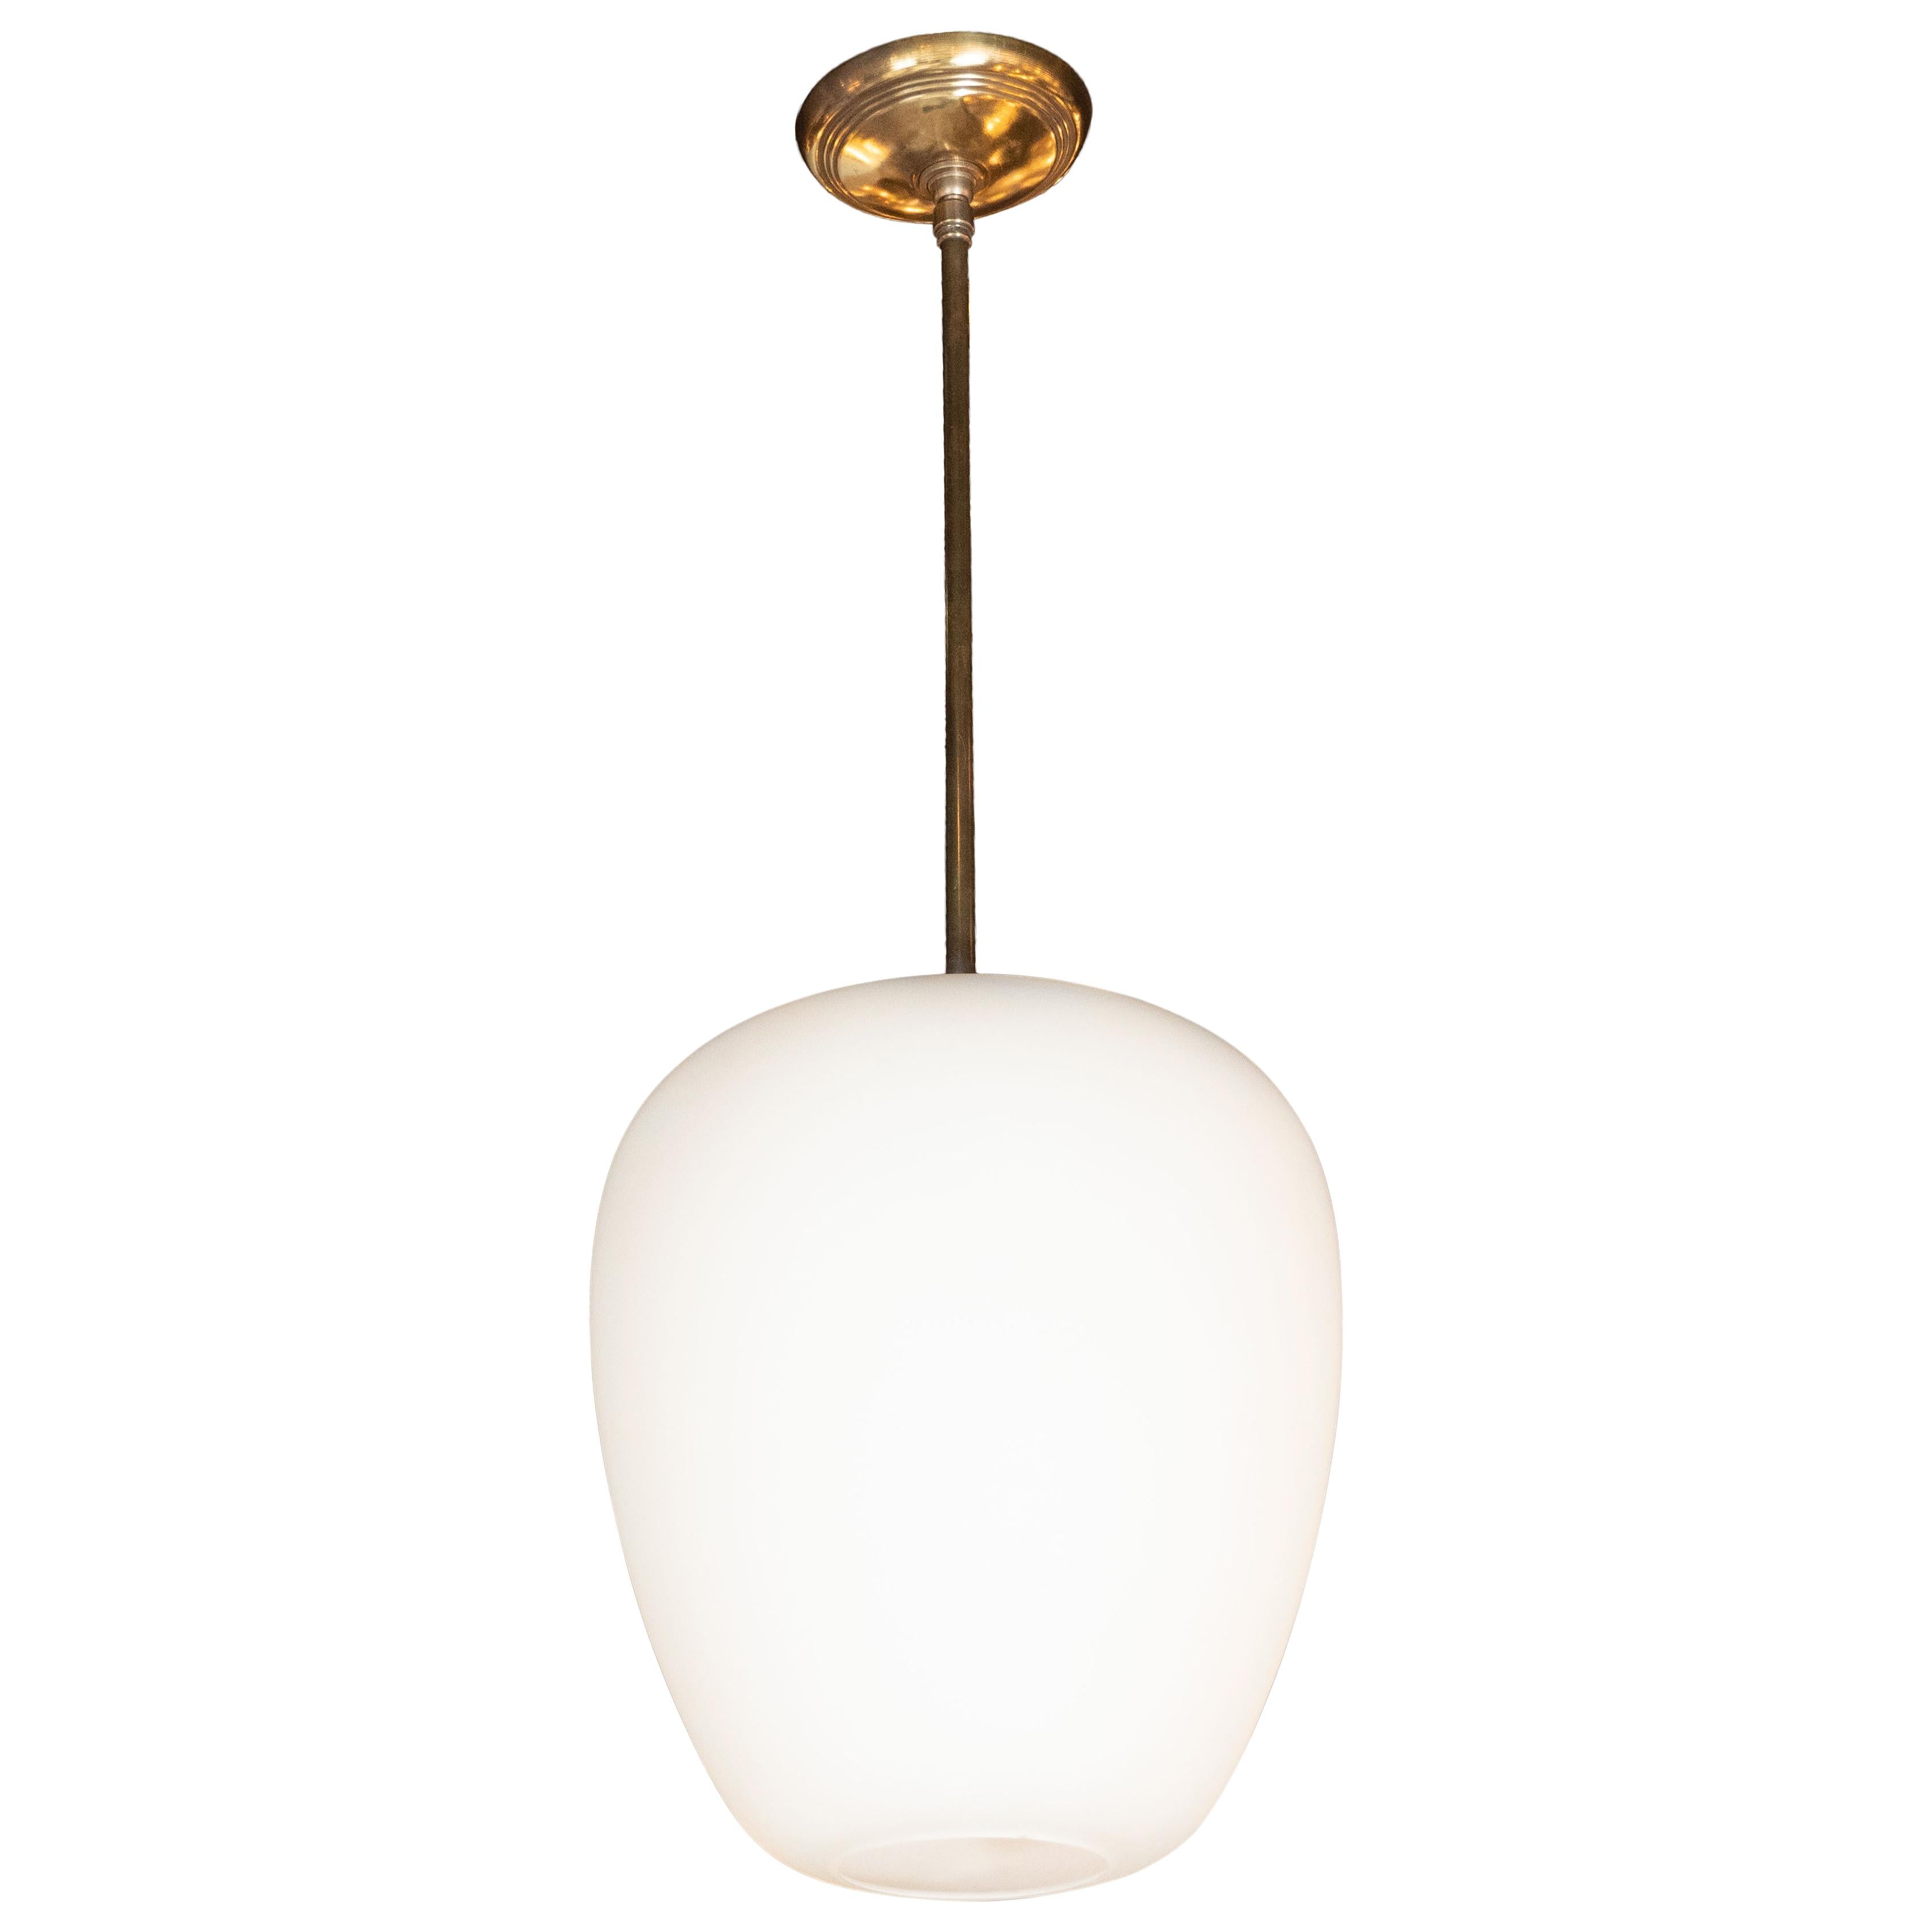 Italian Mid-Century Modern Frosted Glass Pendant with Brass Fittings